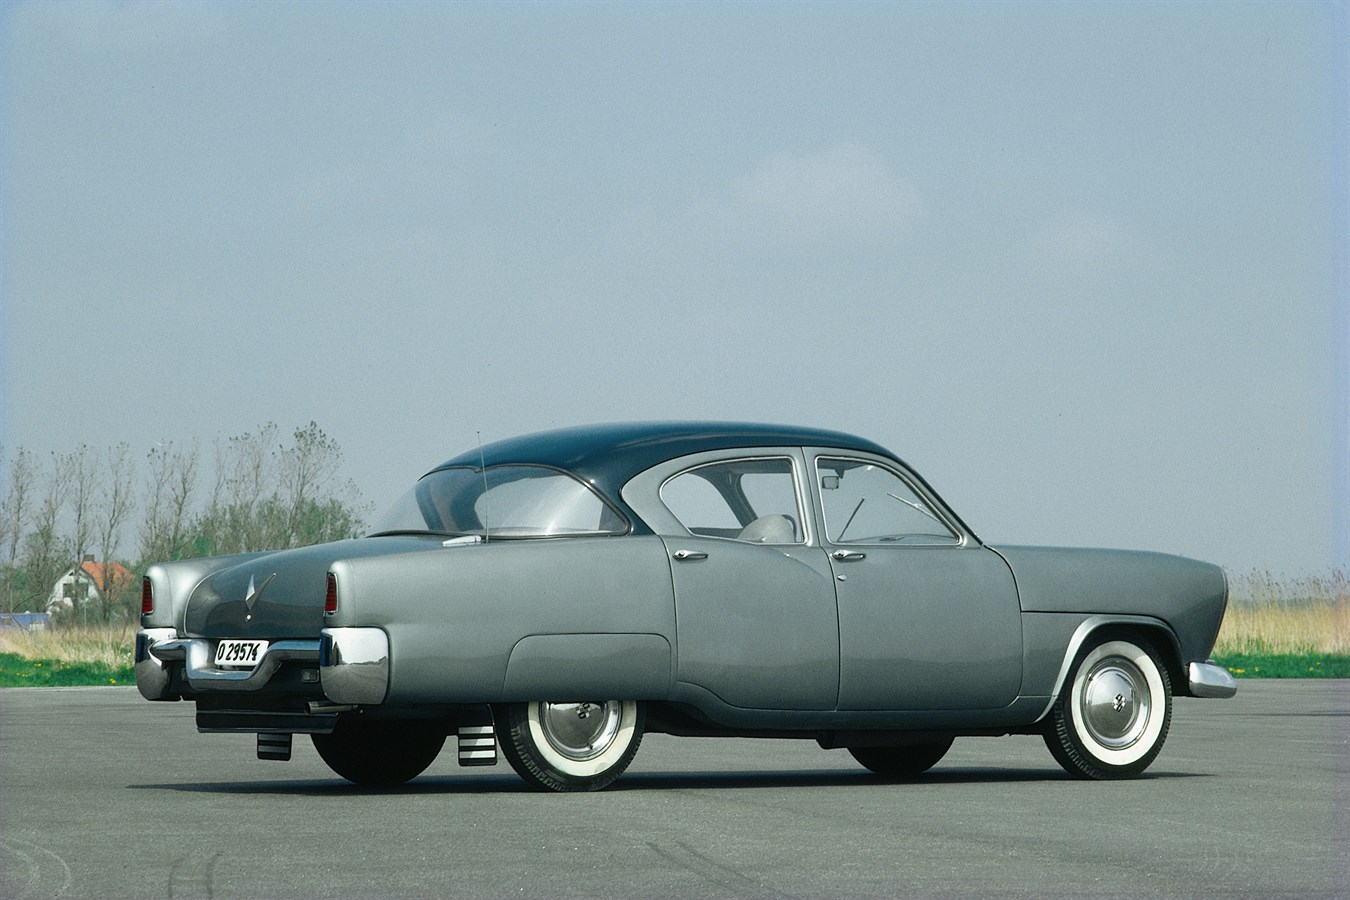 Philip, 1952, With exports to the US on the horizon, this concept was designed to look more like the American cars of the time. It was bigger than the PV444, with a V8 engine and tail fins. A stylish innovation, but, in the event, Volvo was to succeed in